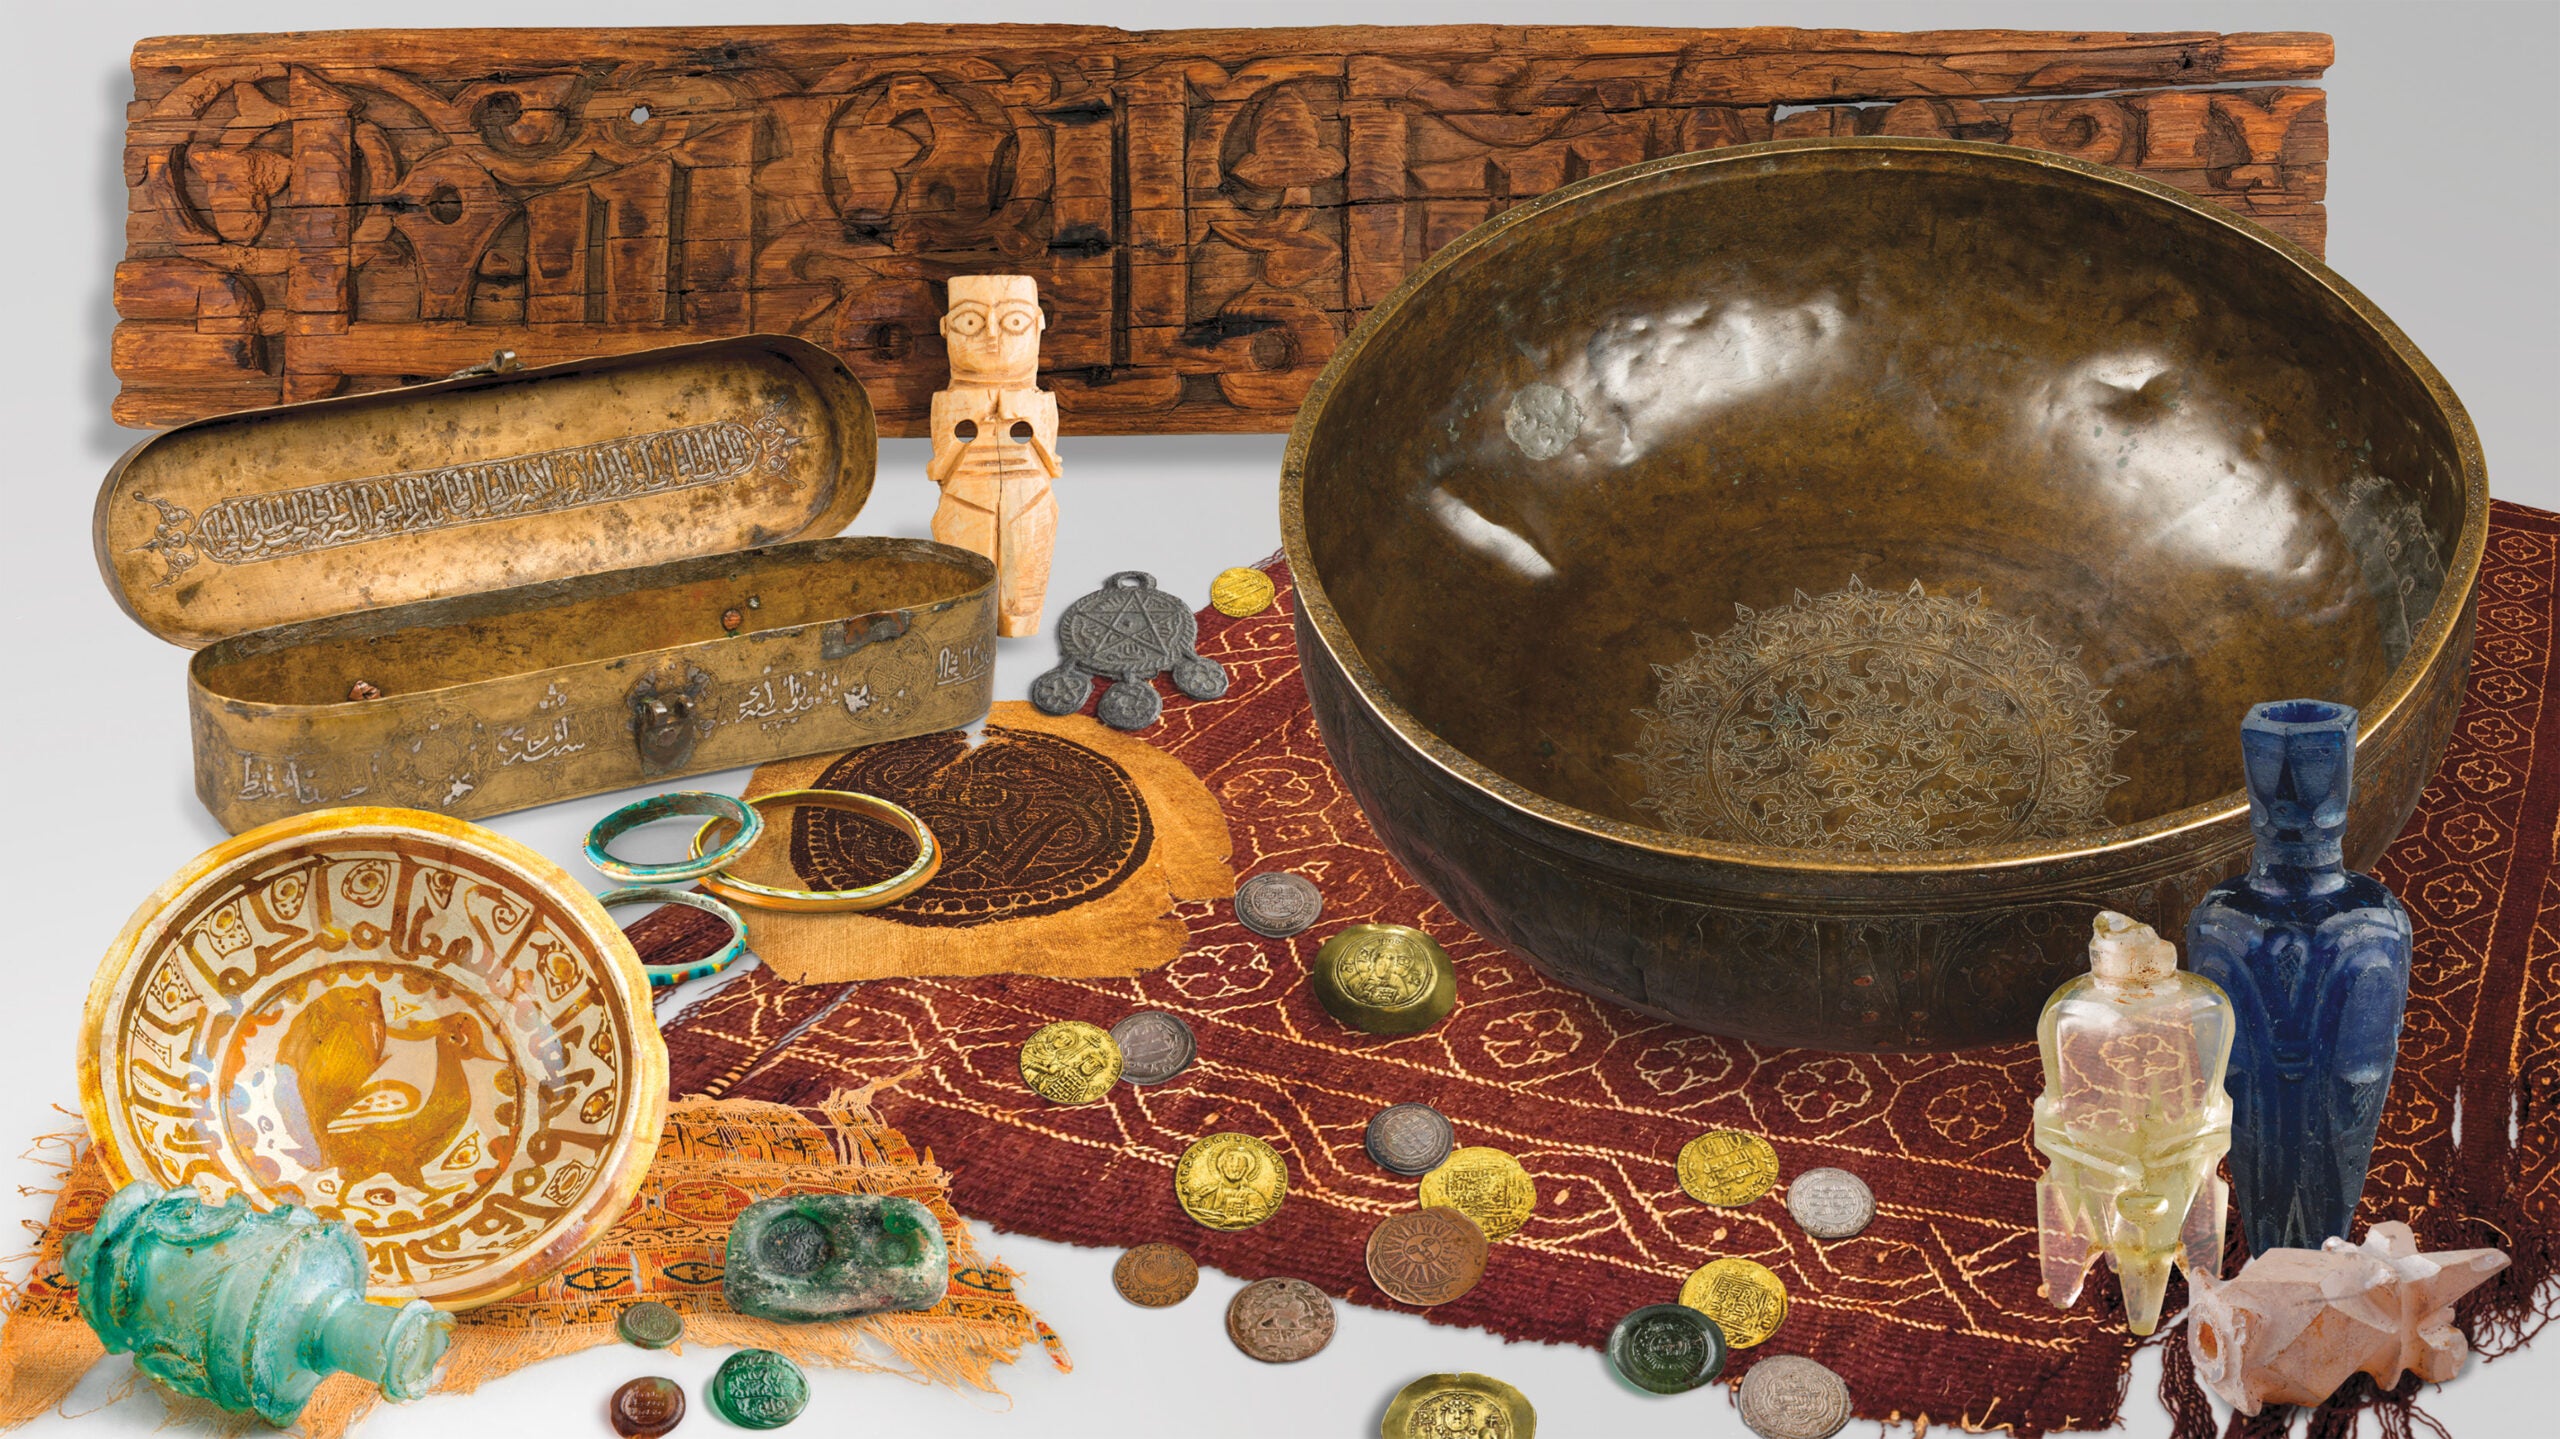  Assemblage of artifacts, including brightly colored textiles, coins, bracelets, amulets, bowls, and flasks.